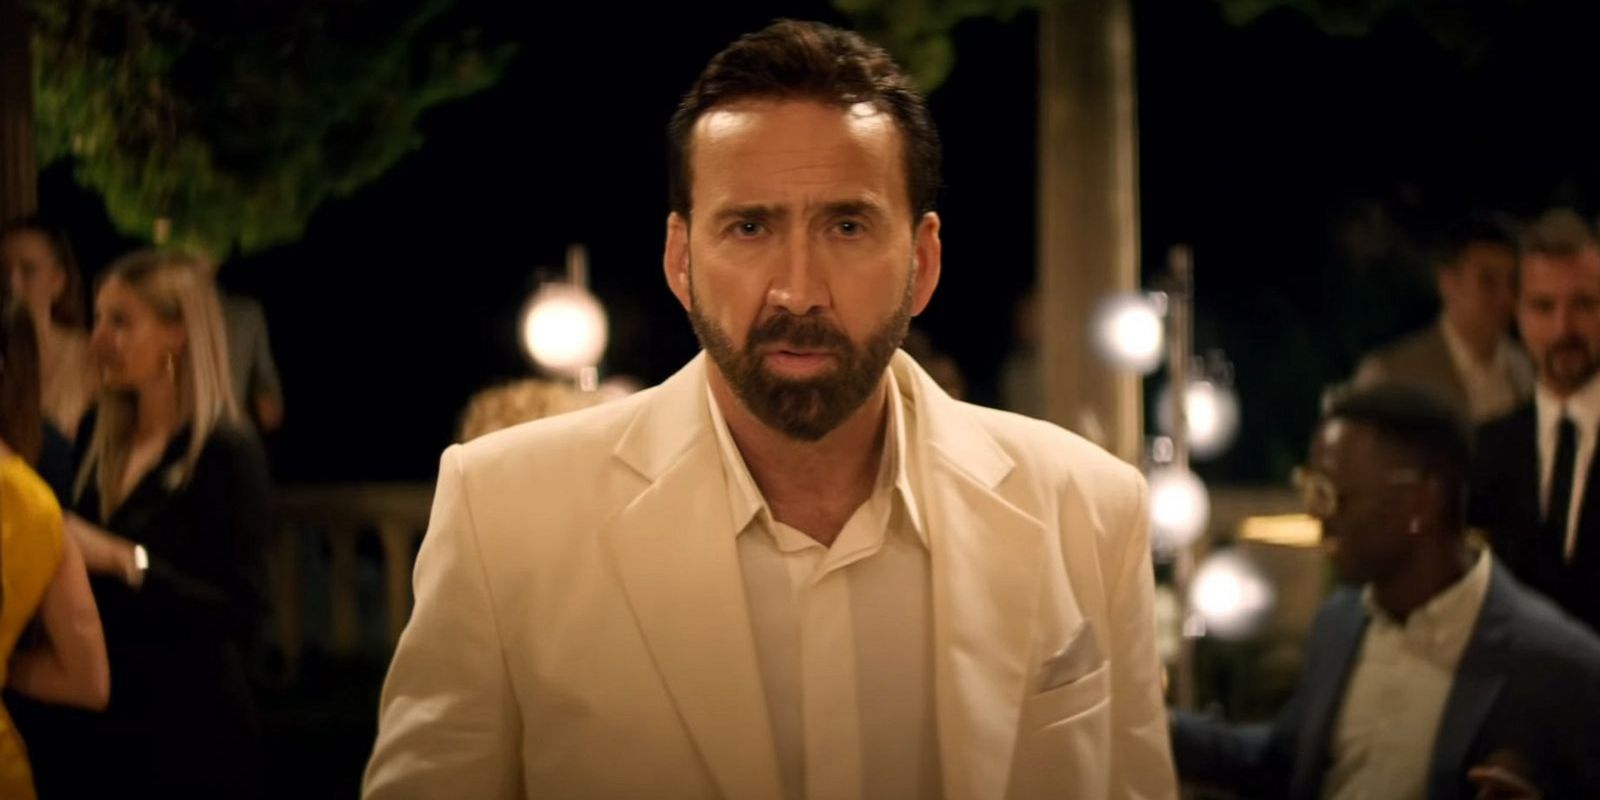 Nic Cage White Tux The Unbearable Weight Of Massive Talent